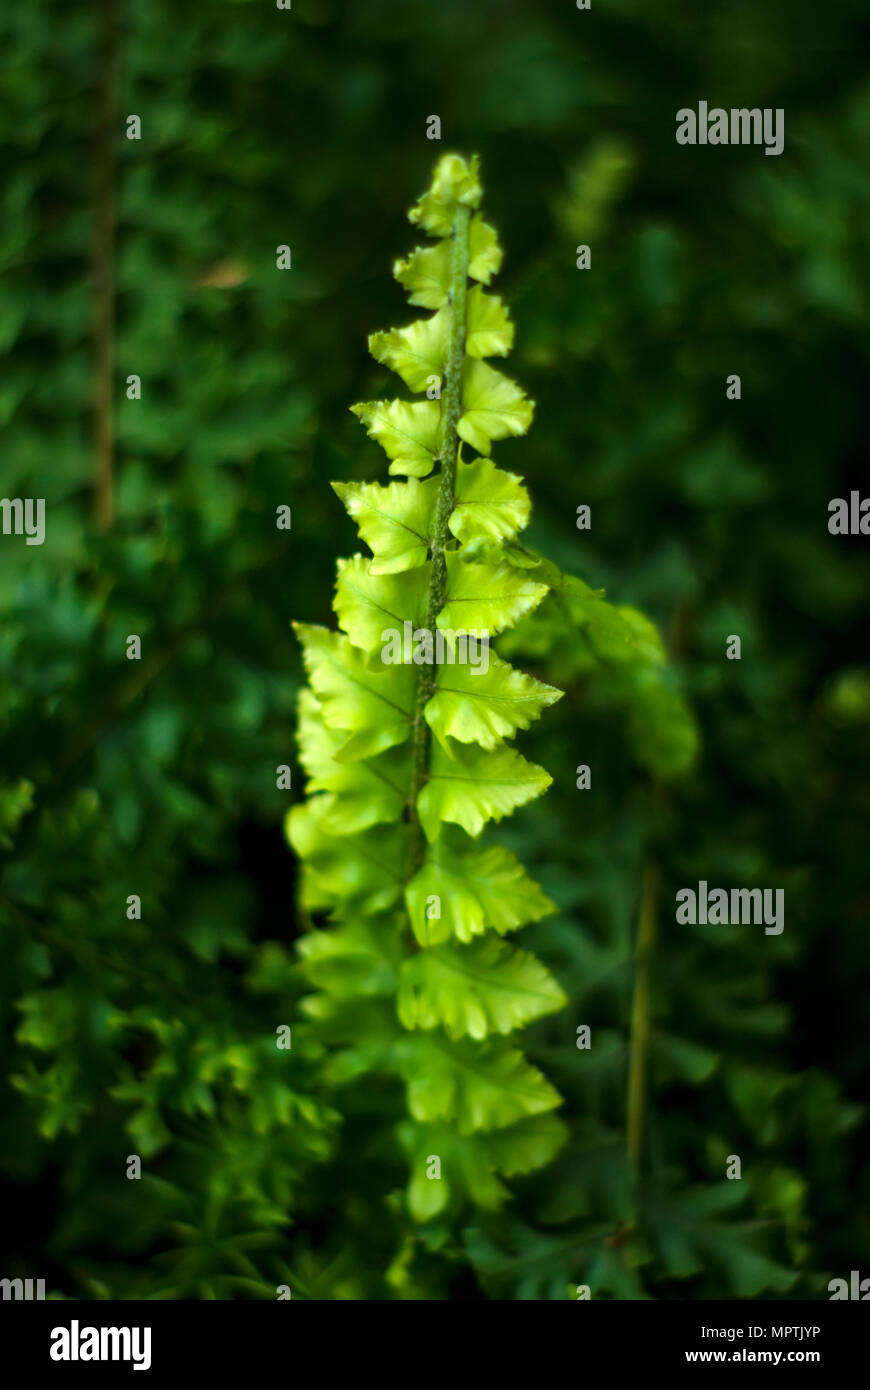 bright green juicy fresh leaf of fern (actually hepatic moss Jungermannia lycopodioides) on a dark blurry plant background Stock Photo